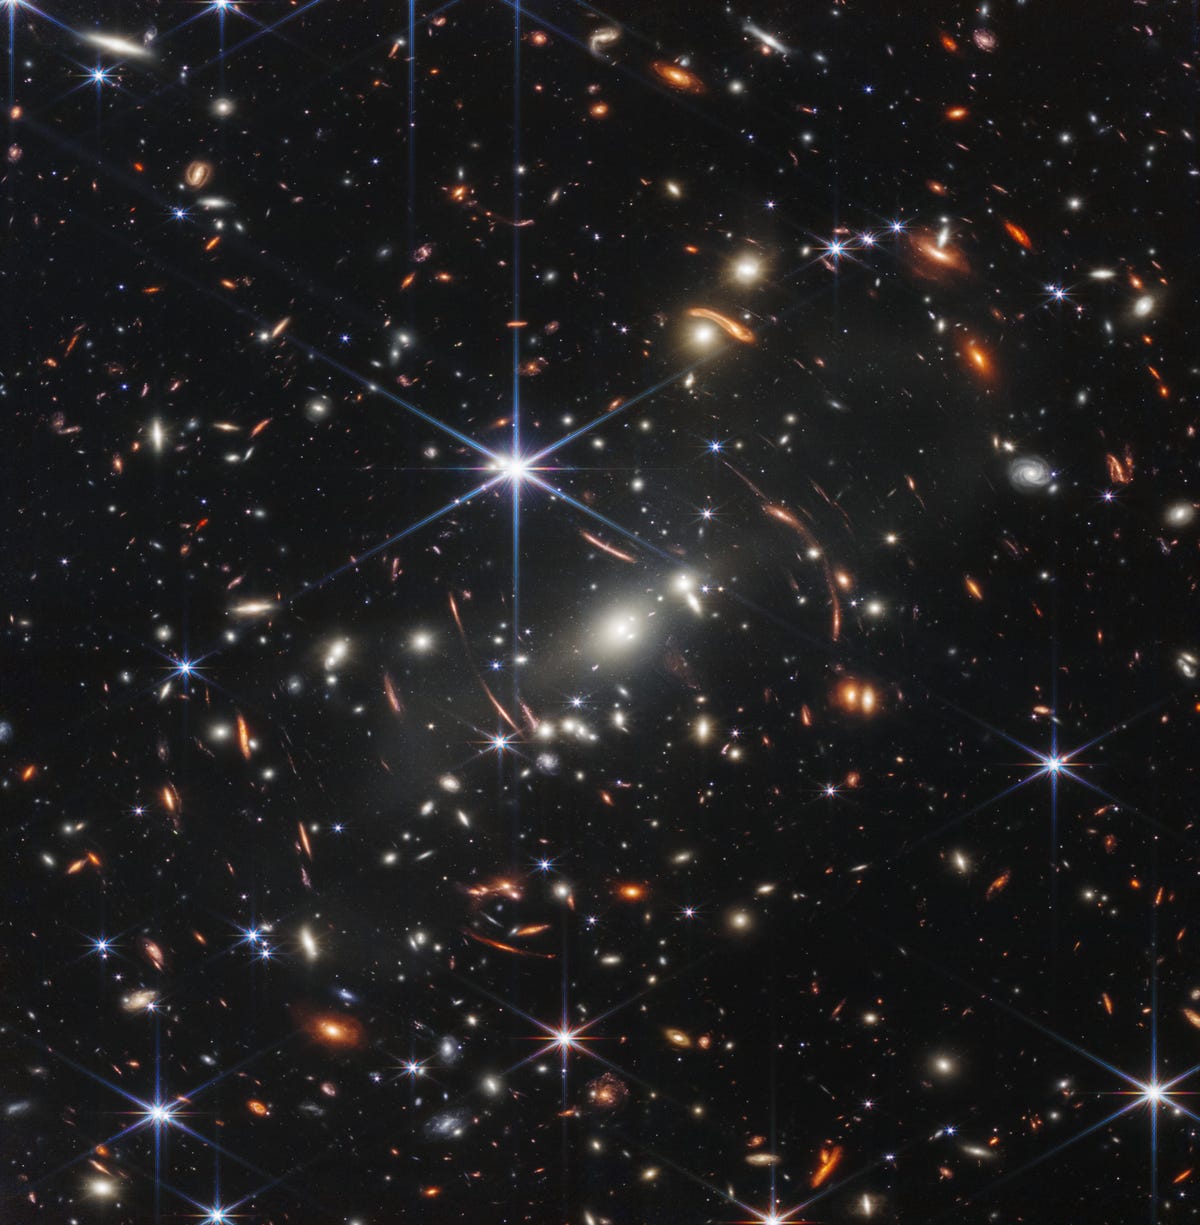 A field of thousands of galaxies against the darkness of space with a large central six-pointed blue star.